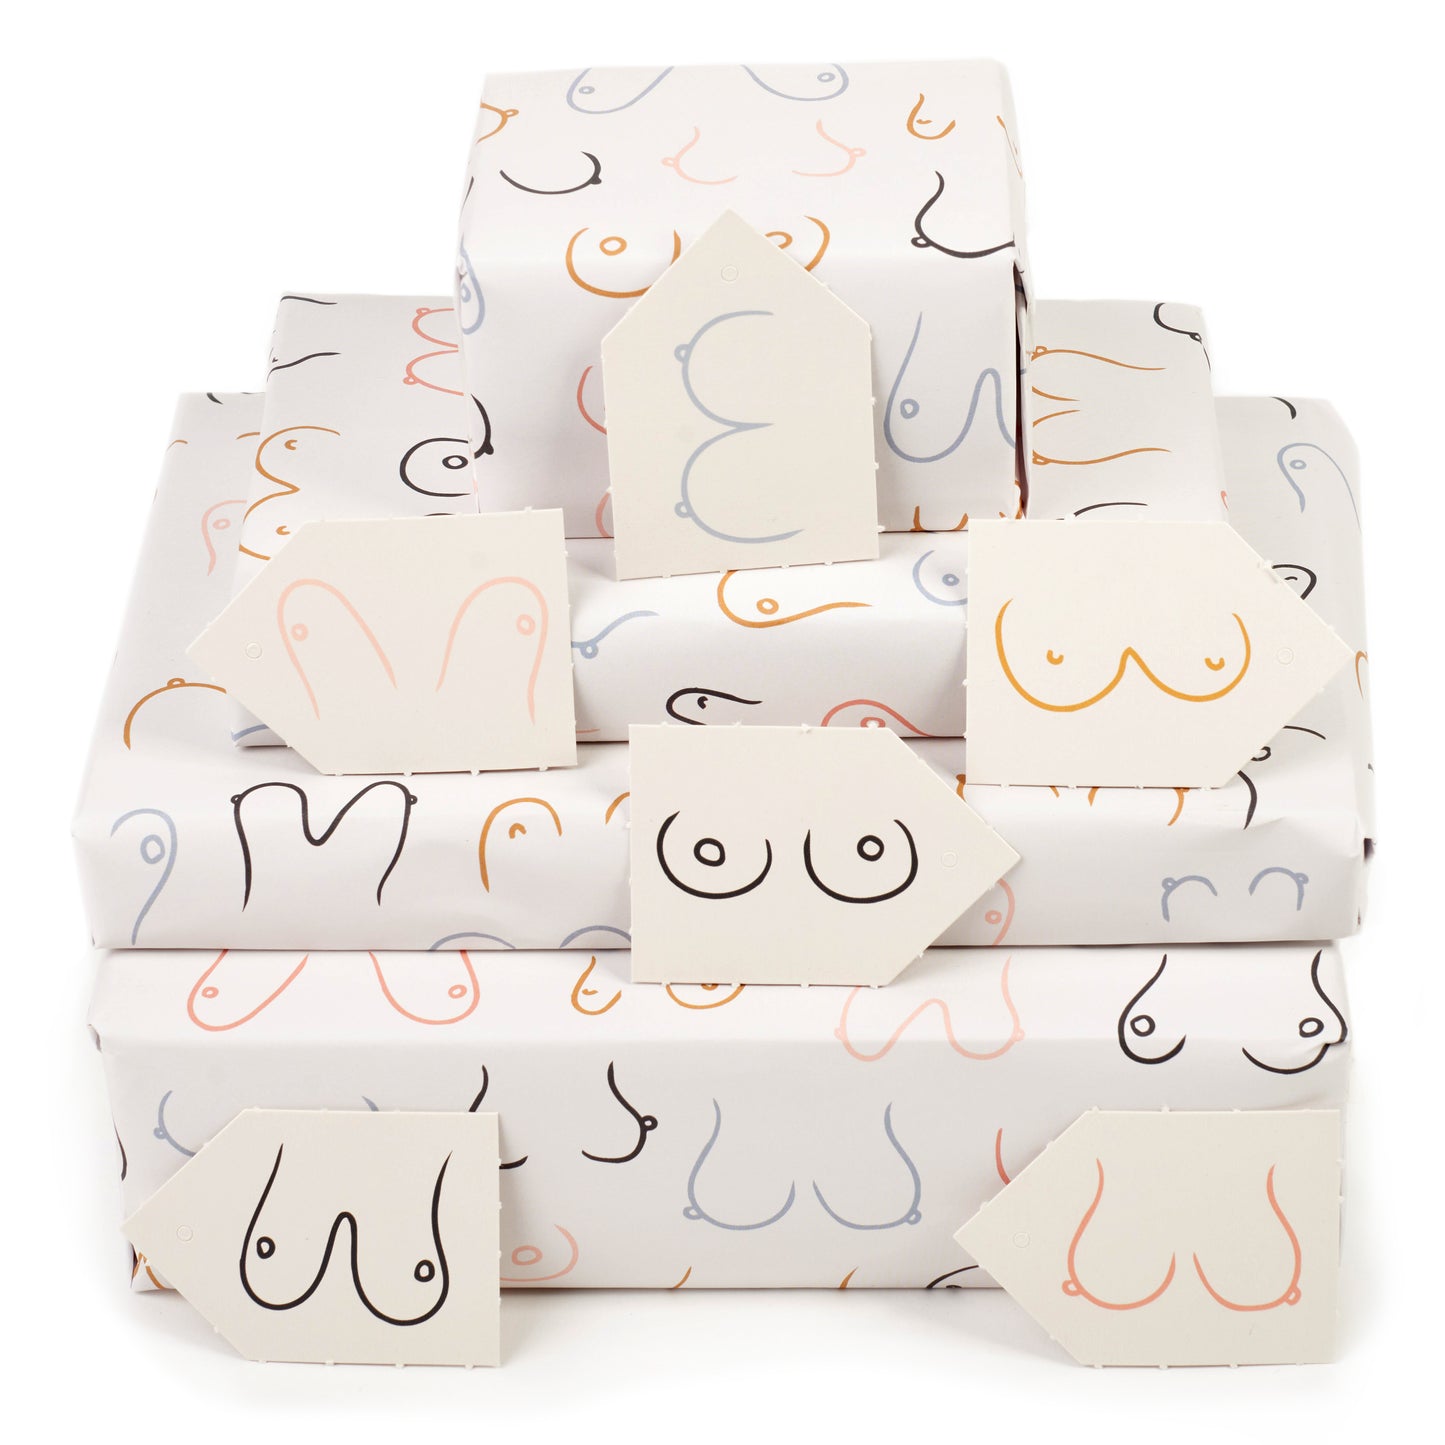 Boobs Wrapping Paper - 6 Sheets of Gift Wrap - 'Double Boobs' - White Gift Wrap - For Women Her